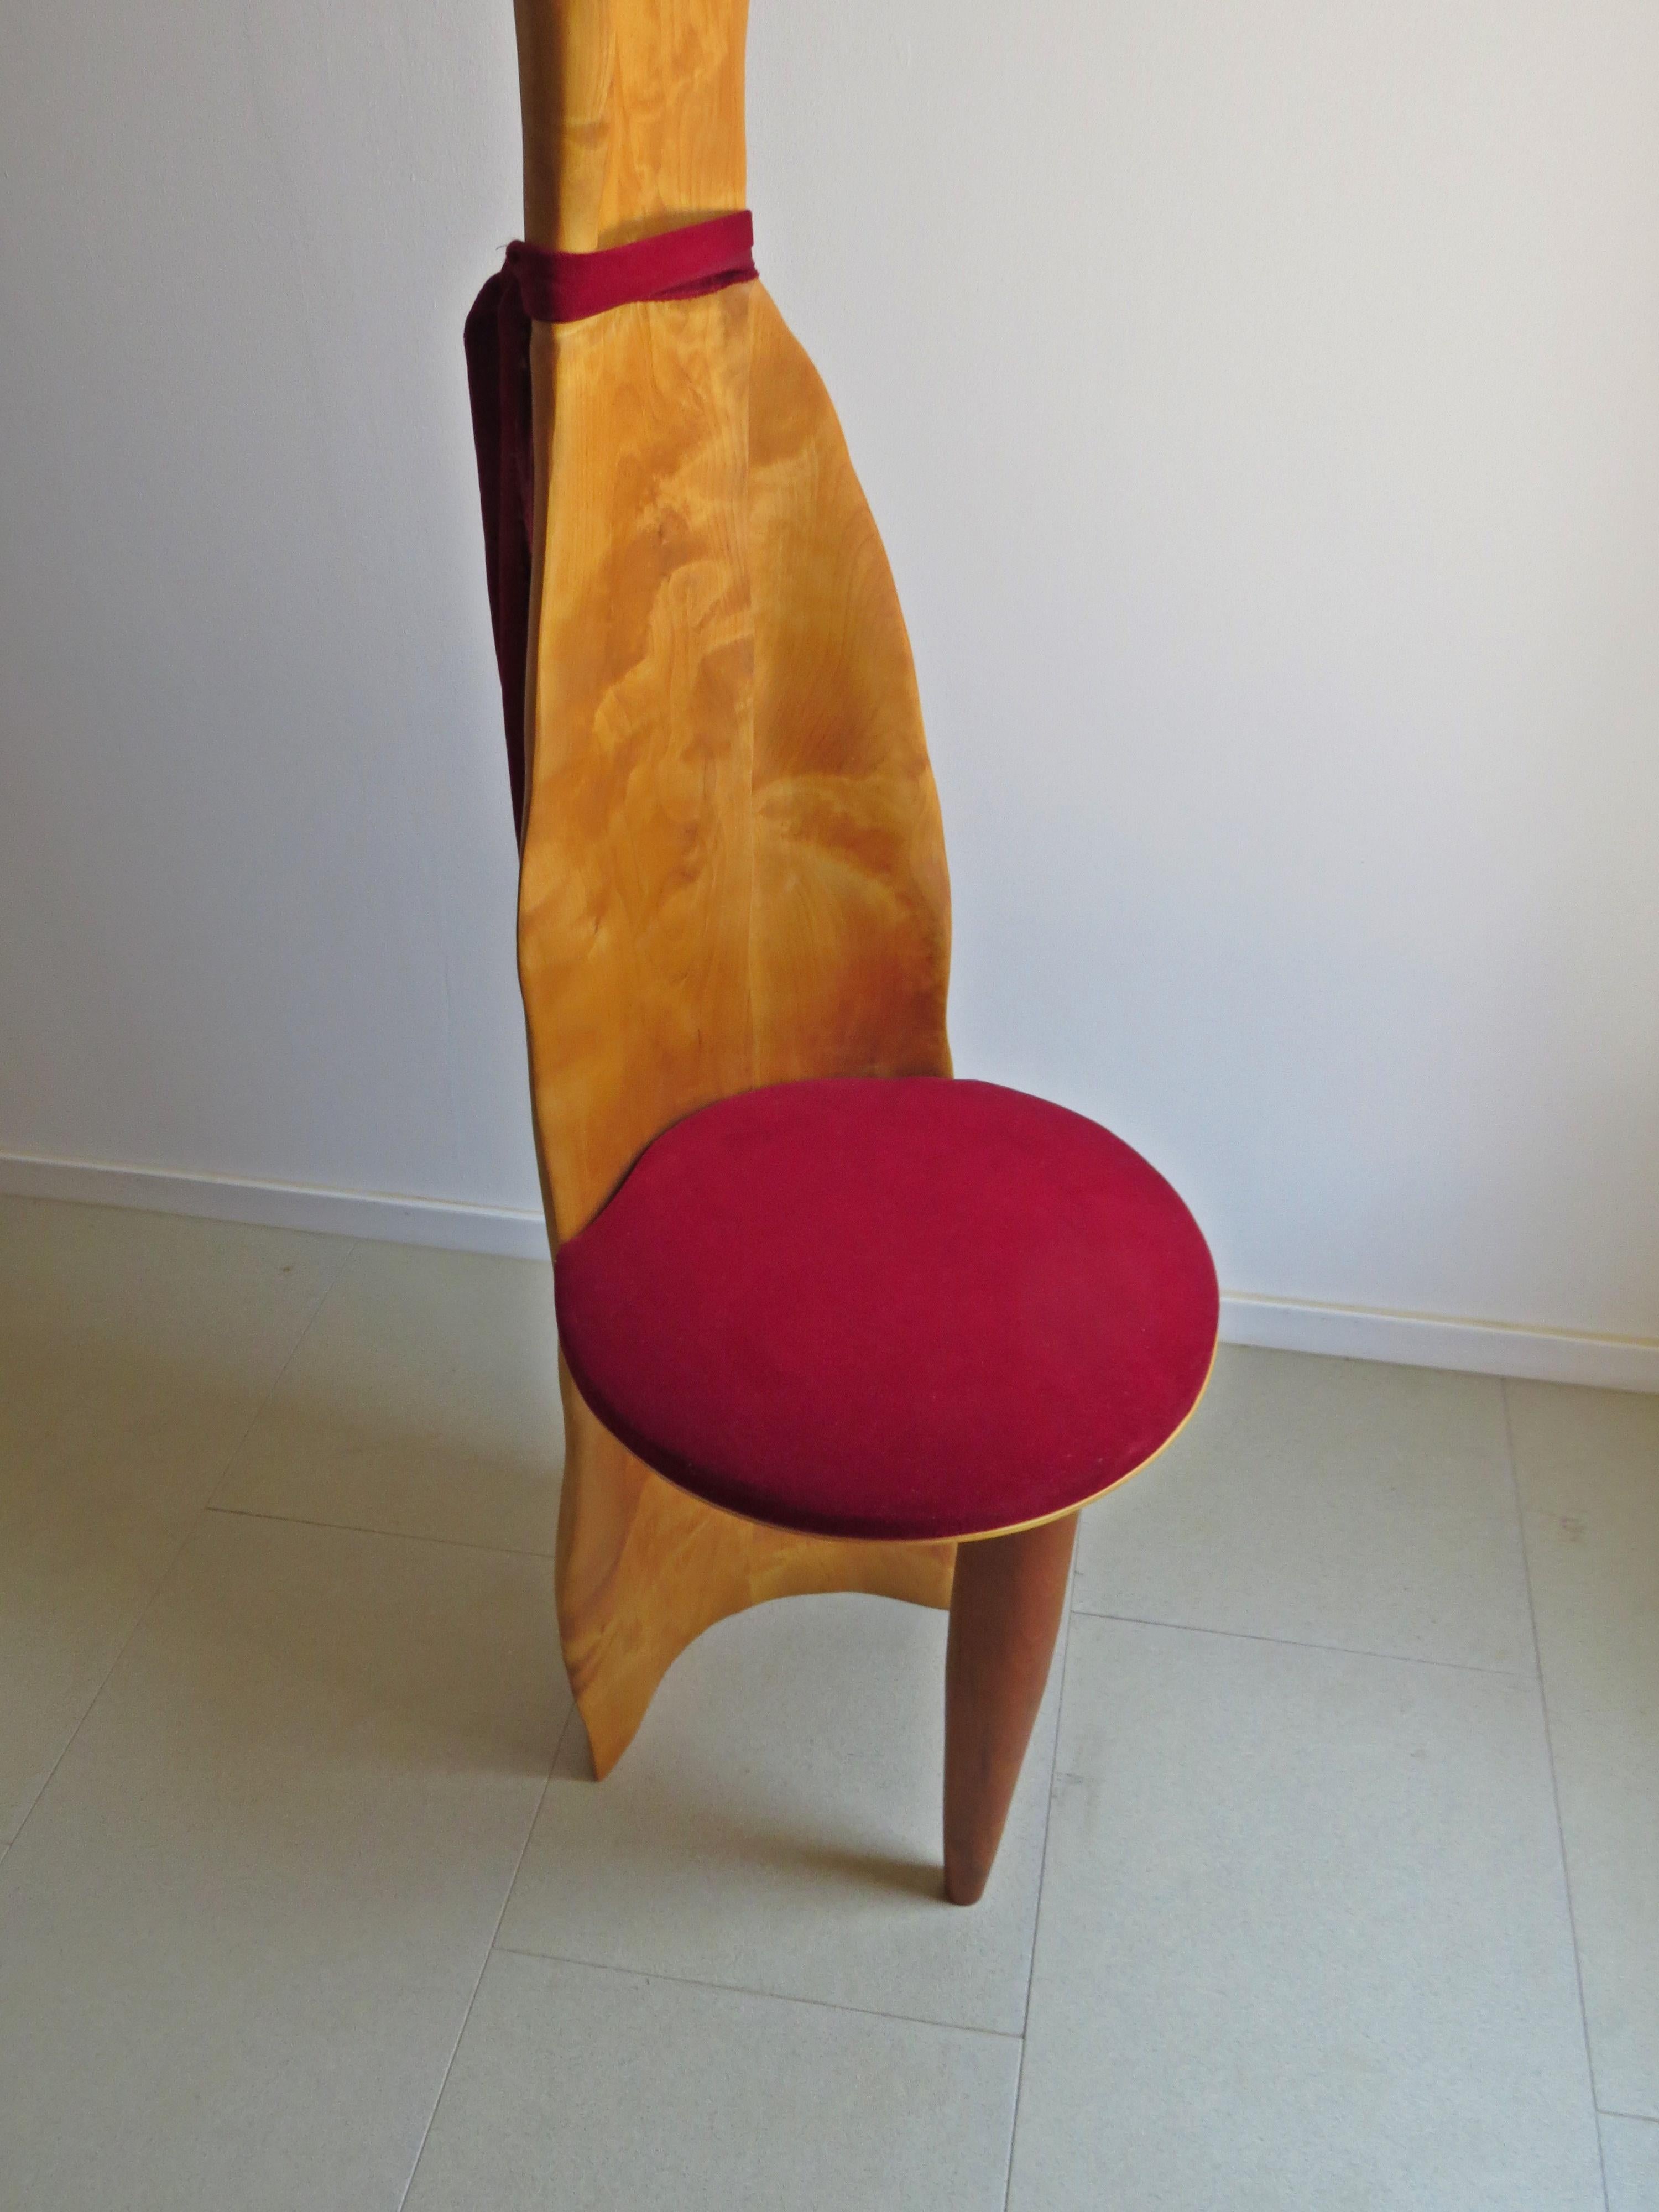 Hand-Crafted Object Chair, Throne, Organically Handmade, Unique Item For Sale